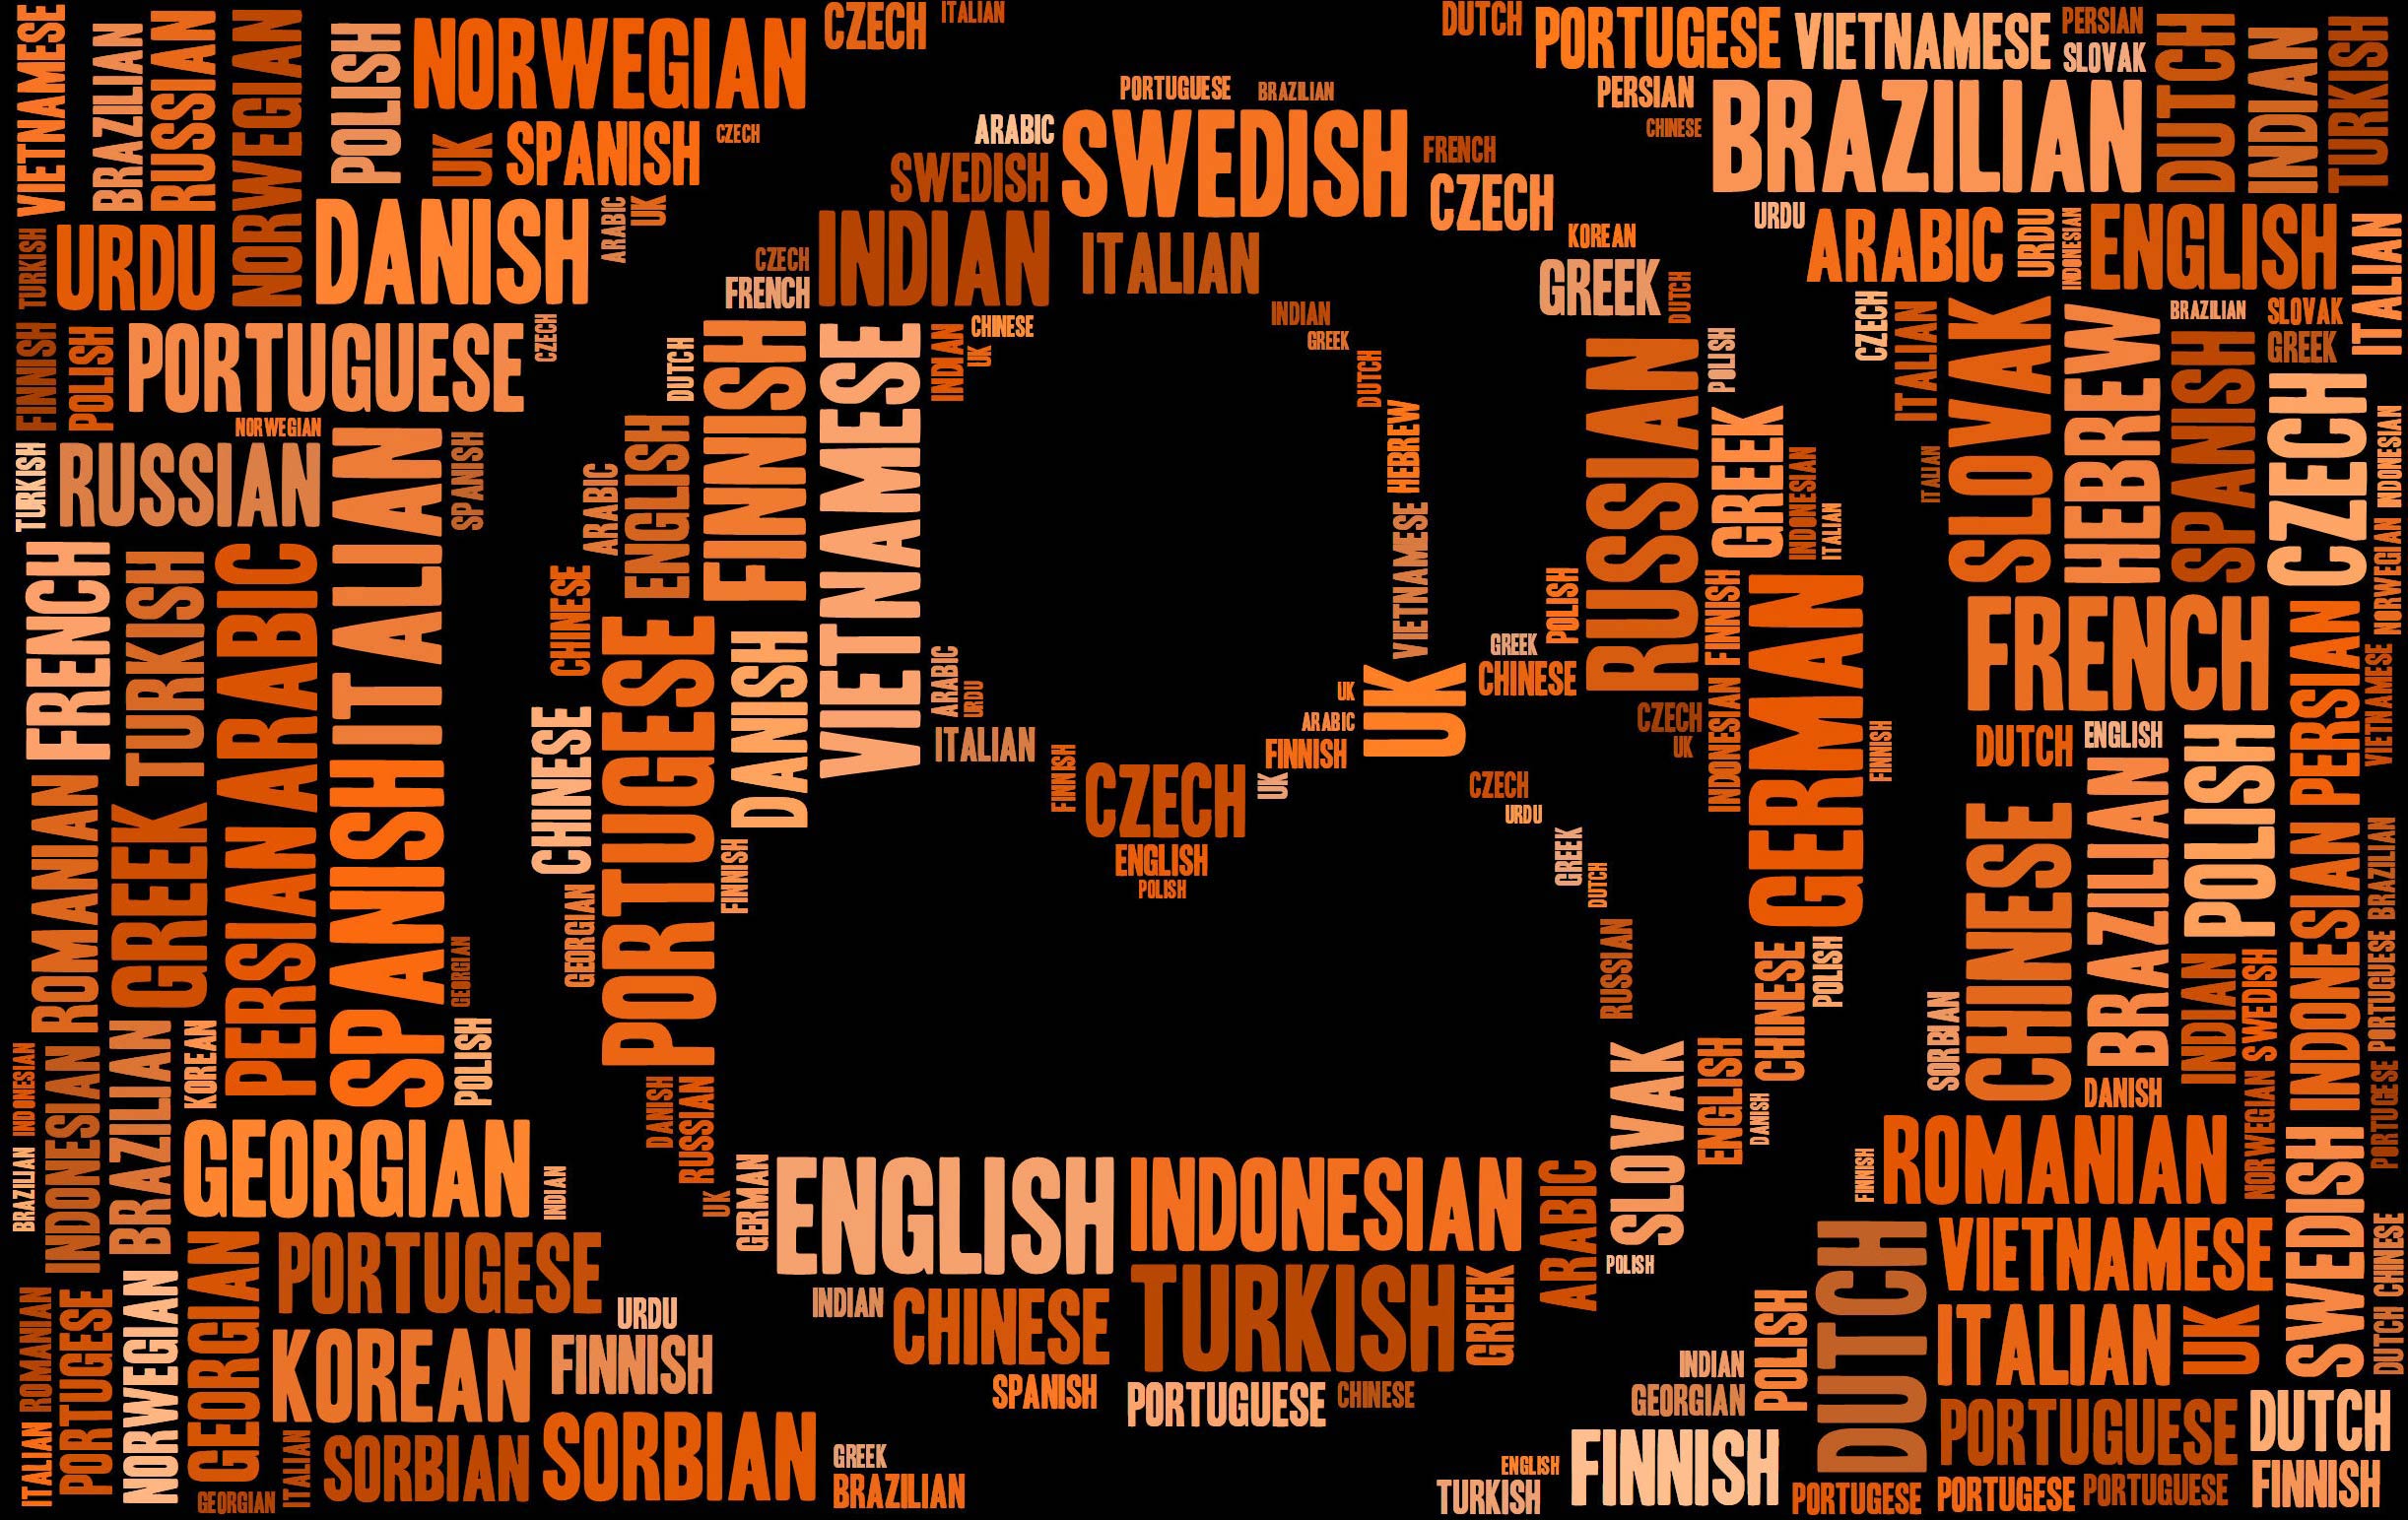 Tag Cloud of Languages used in BuddyPress Sites listed below